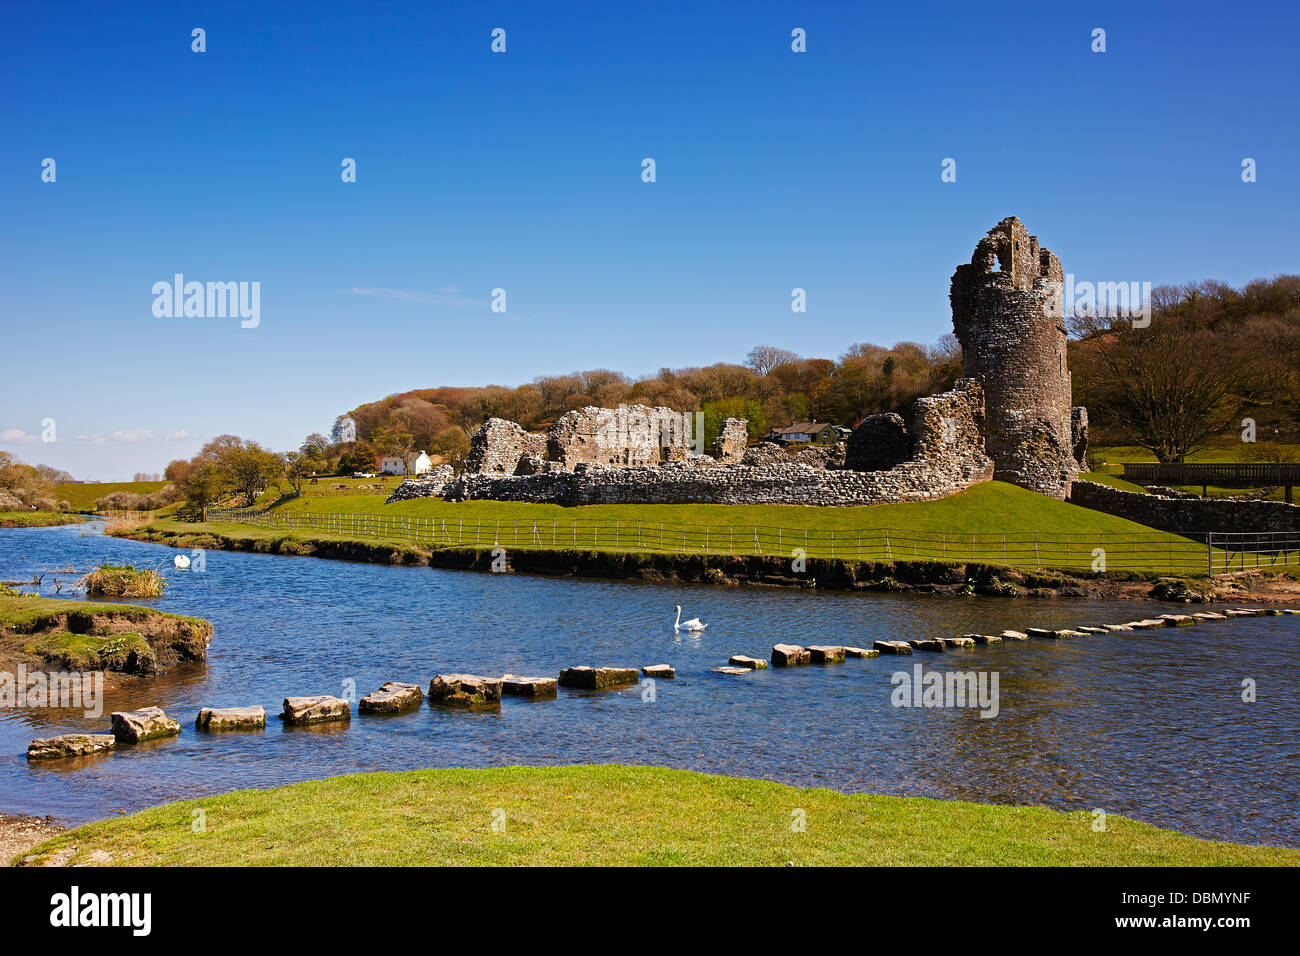 Stepping Stones across the Ogmore River to Ogmore Castle, Ogmore, Glamorgan, South Wales, UK Stock Photo